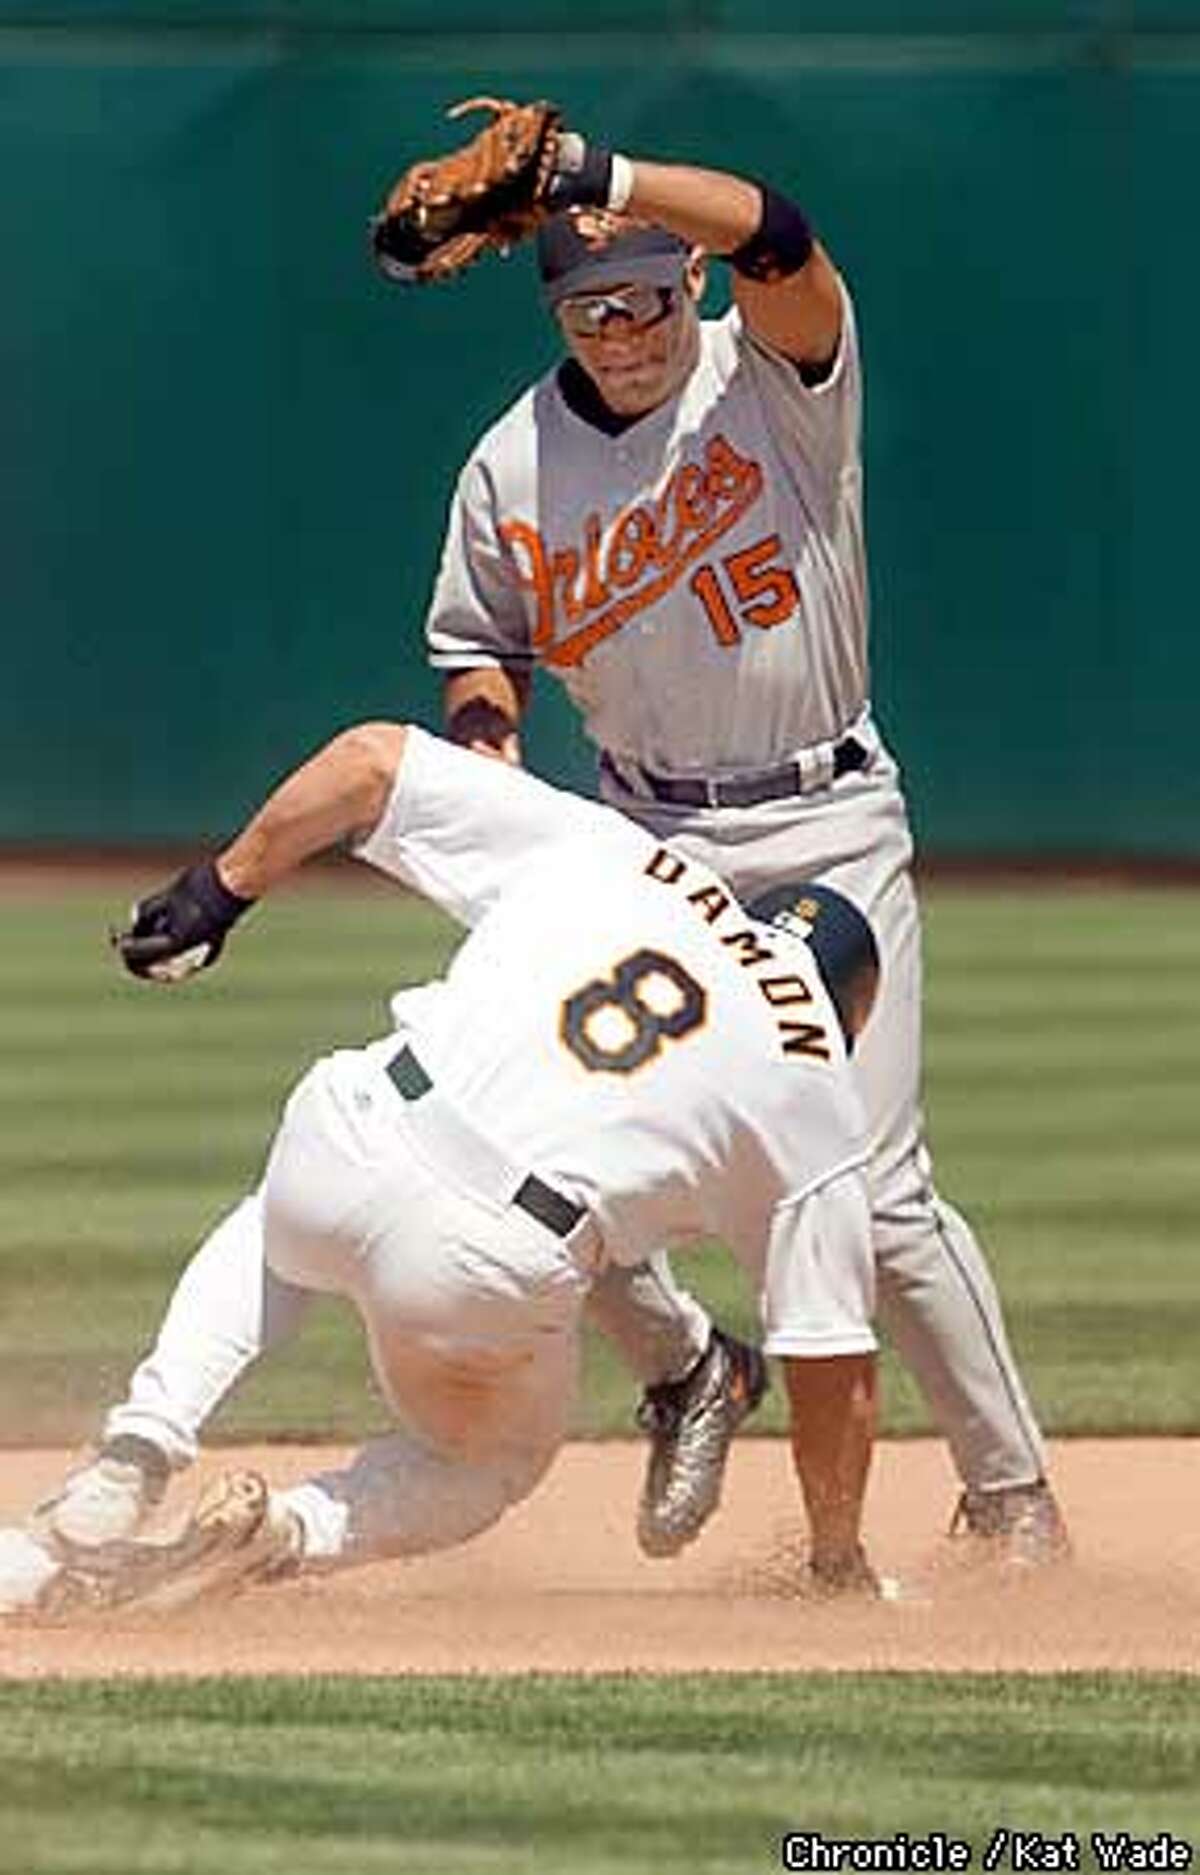 With the Oriole's Jerry Hairston, close behind, Atheletic's player Johnny Damon stole second base during the 7th inning during the game against the Baltimore Orioles at Network Associates Coliseum June 4, 2001. SAN FRANCISCO CHRONICLE PHOTO BY KAT WADE